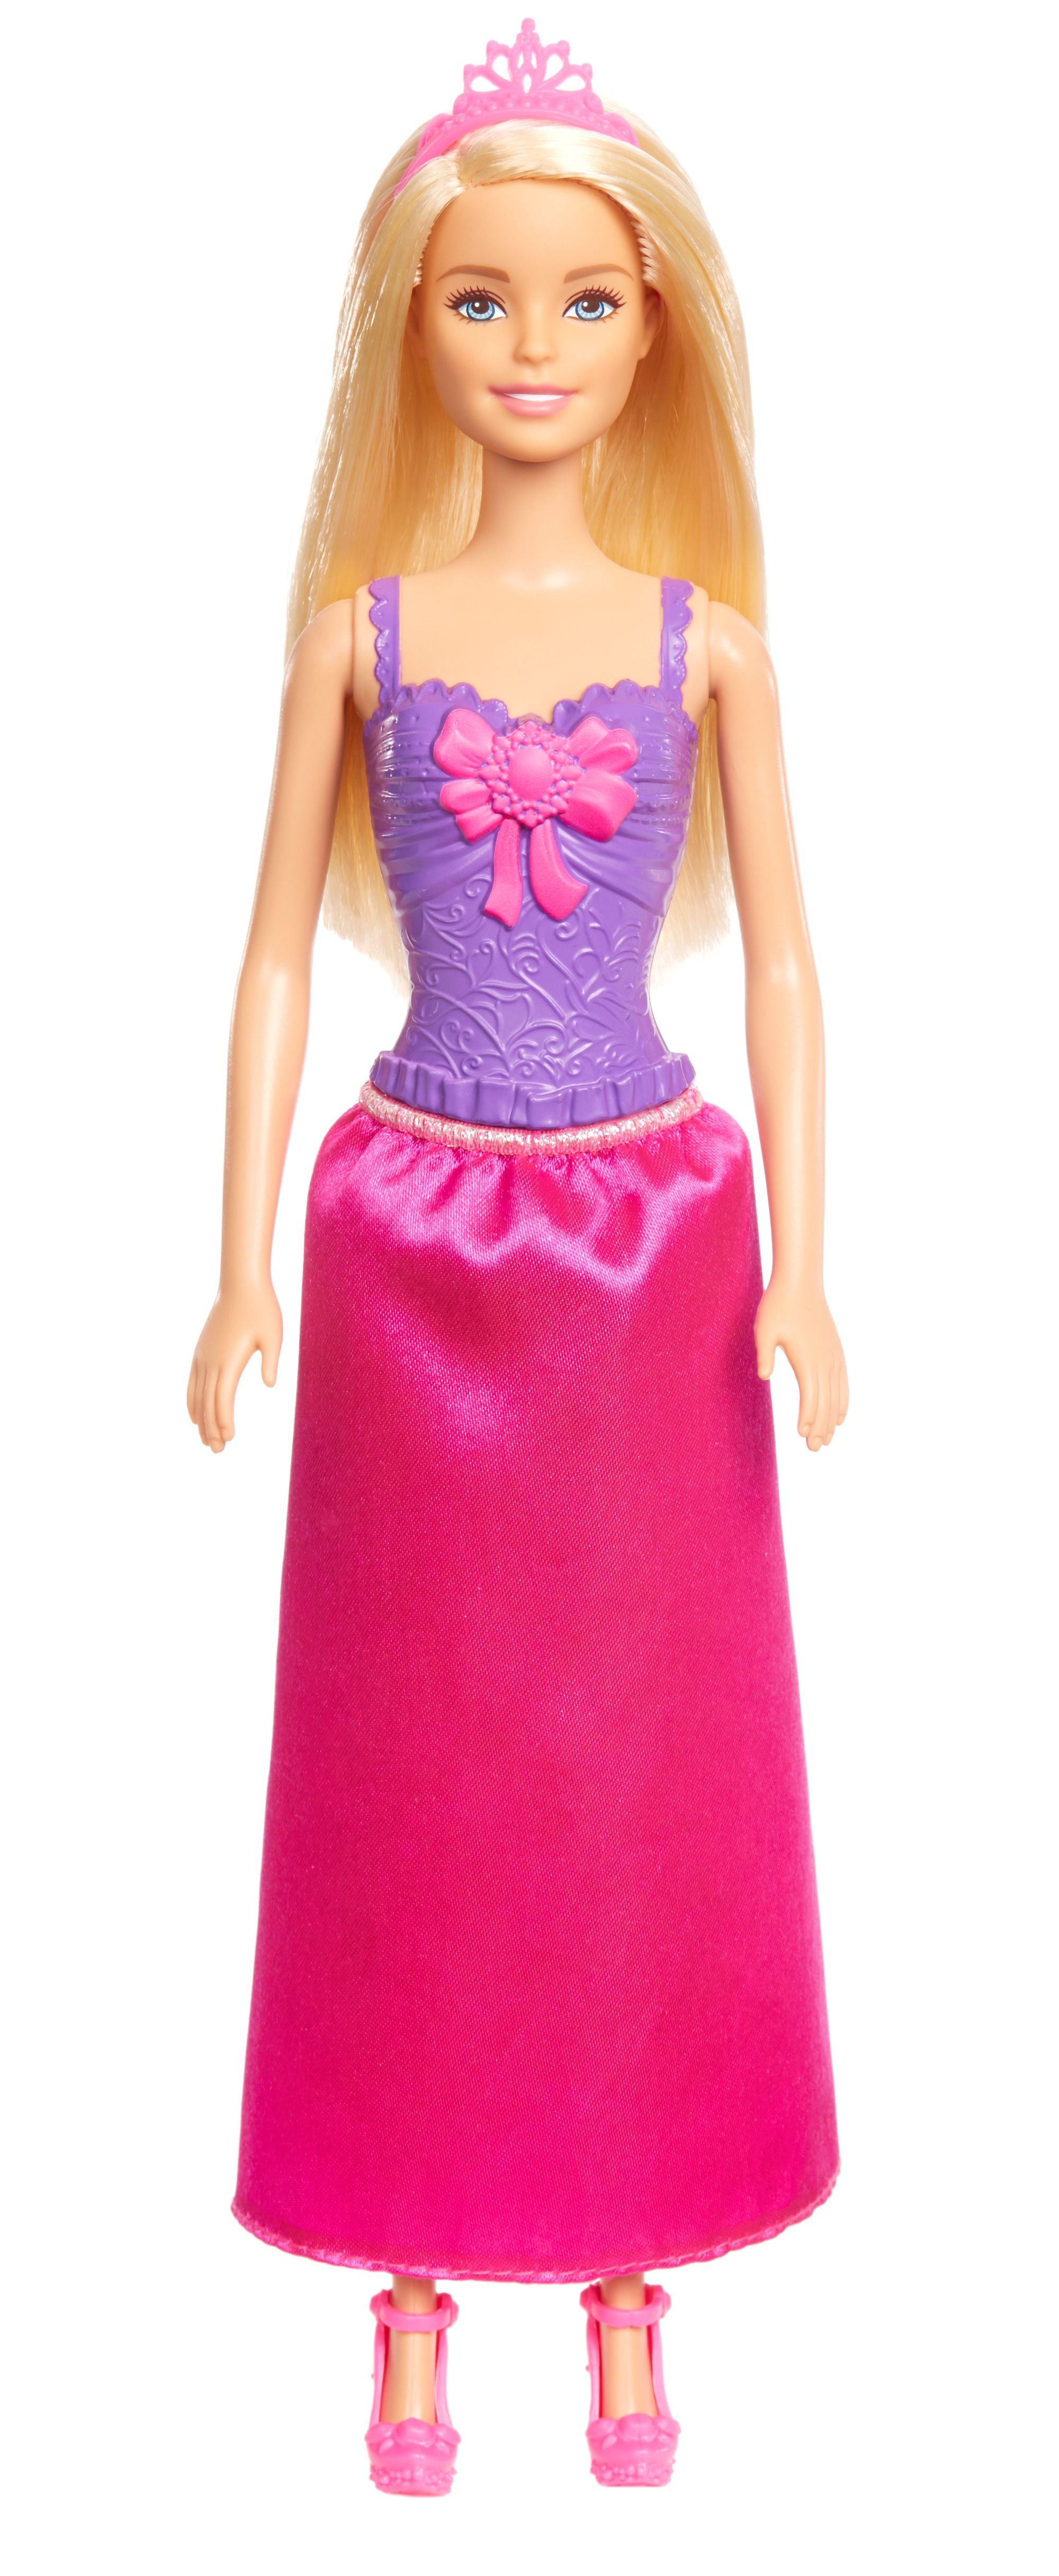 Barbie Dreamtopia Royal Doll with Blonde Hair, Shimmery Pink Skirt & Headband Accessory - image 1 of 4